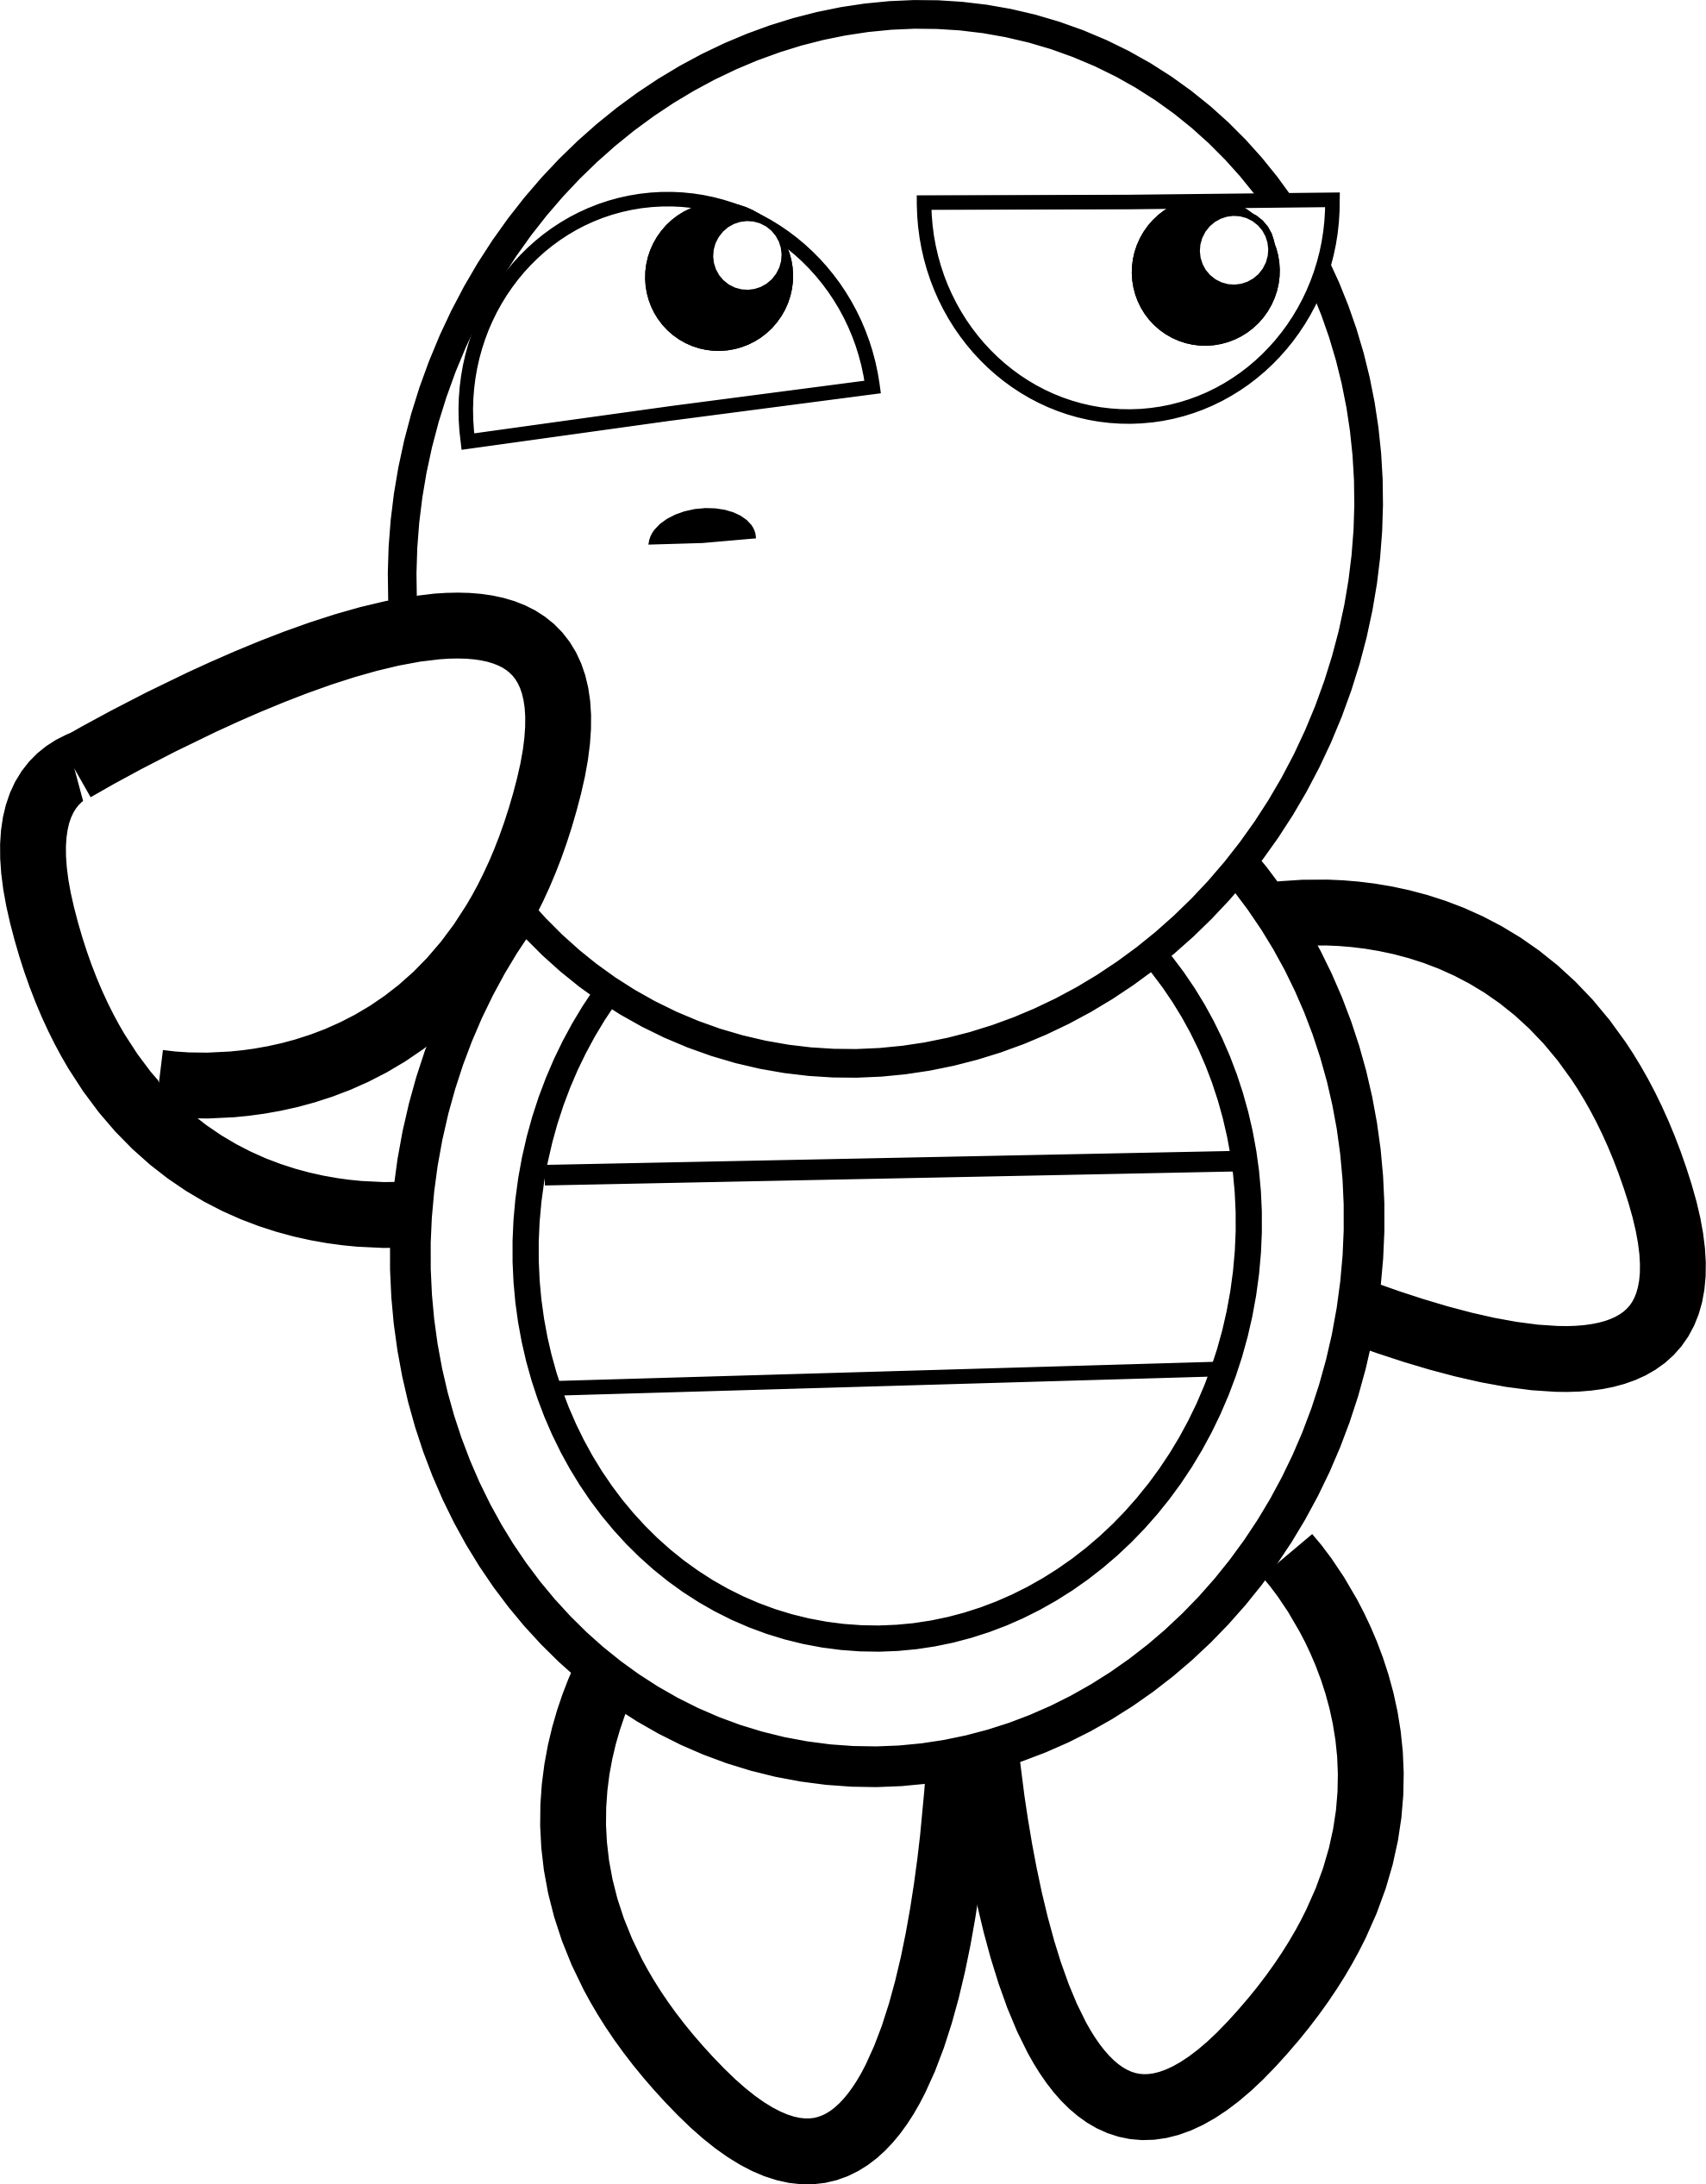 Line drawing clip art. White clipart turtle